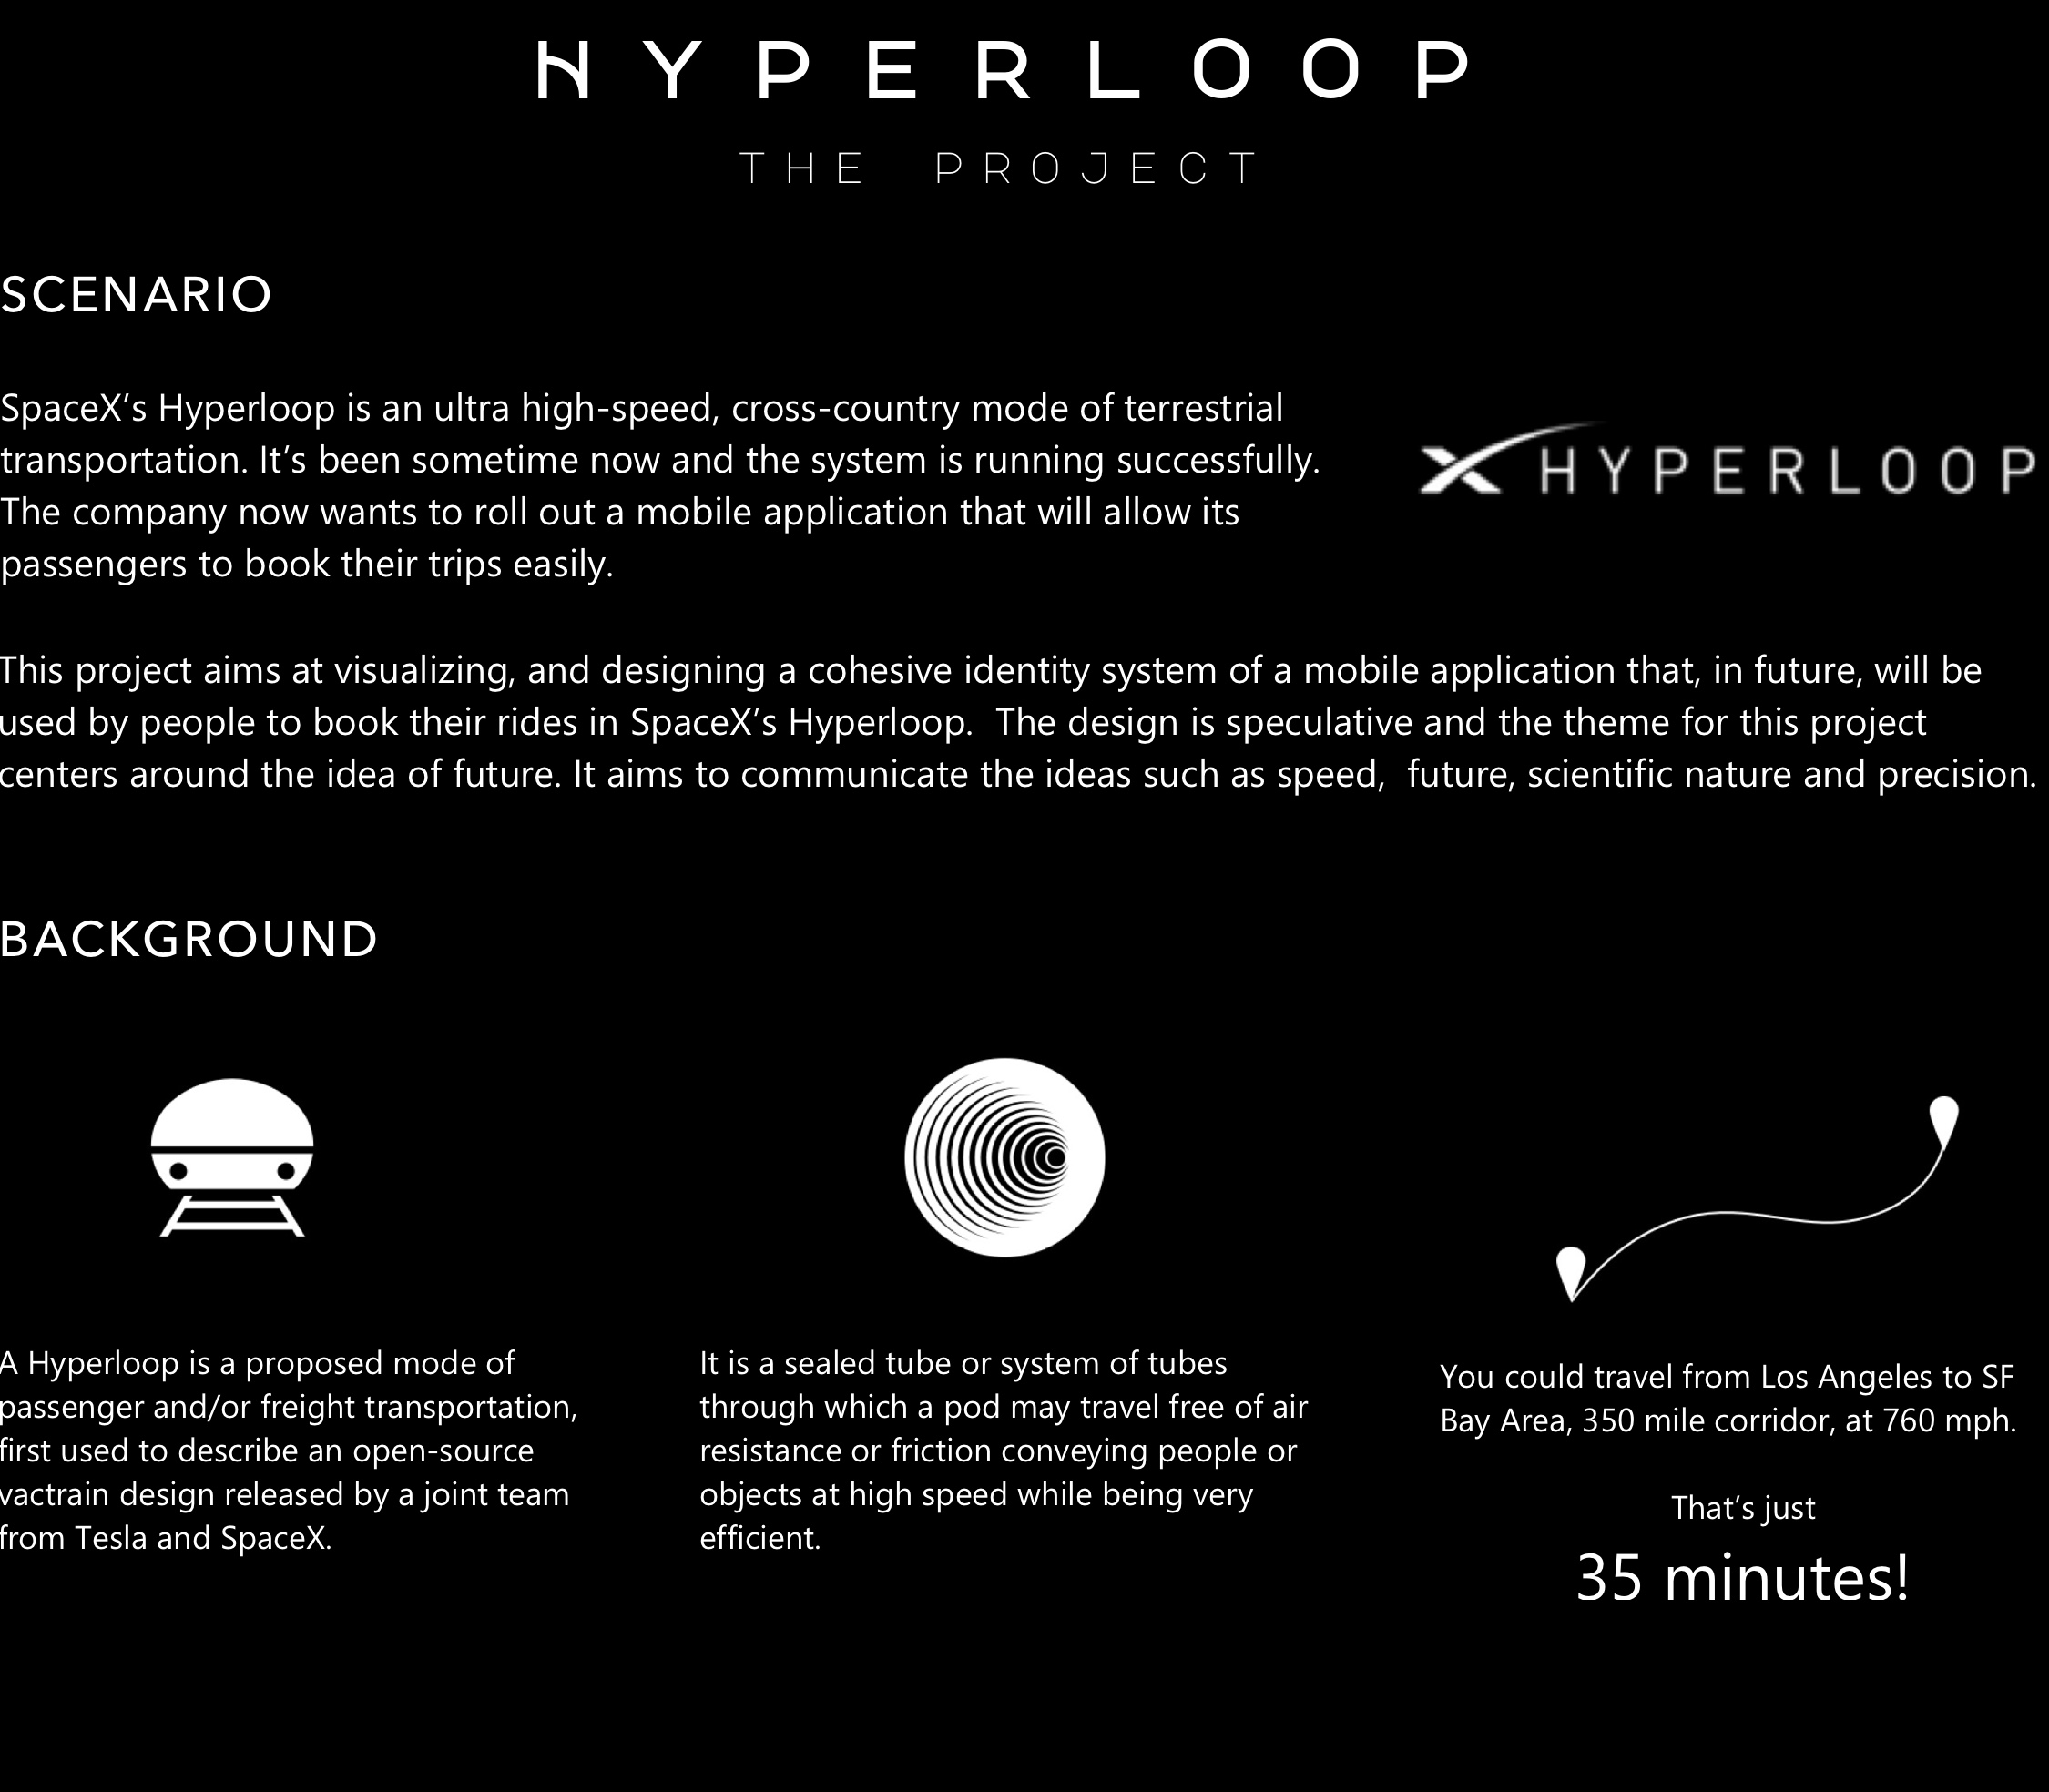 Hyperloop Project Summary: This project aims at visualizing, and designing a cohesive identity system of a mobile application that, in future, will be used by people to book their rides in SpaceX’s Hyperloop.  The design is speculative and the theme for this project centers around the idea of future. It aims to communicate the ideas such as speed,  future, scientific nature and precision.